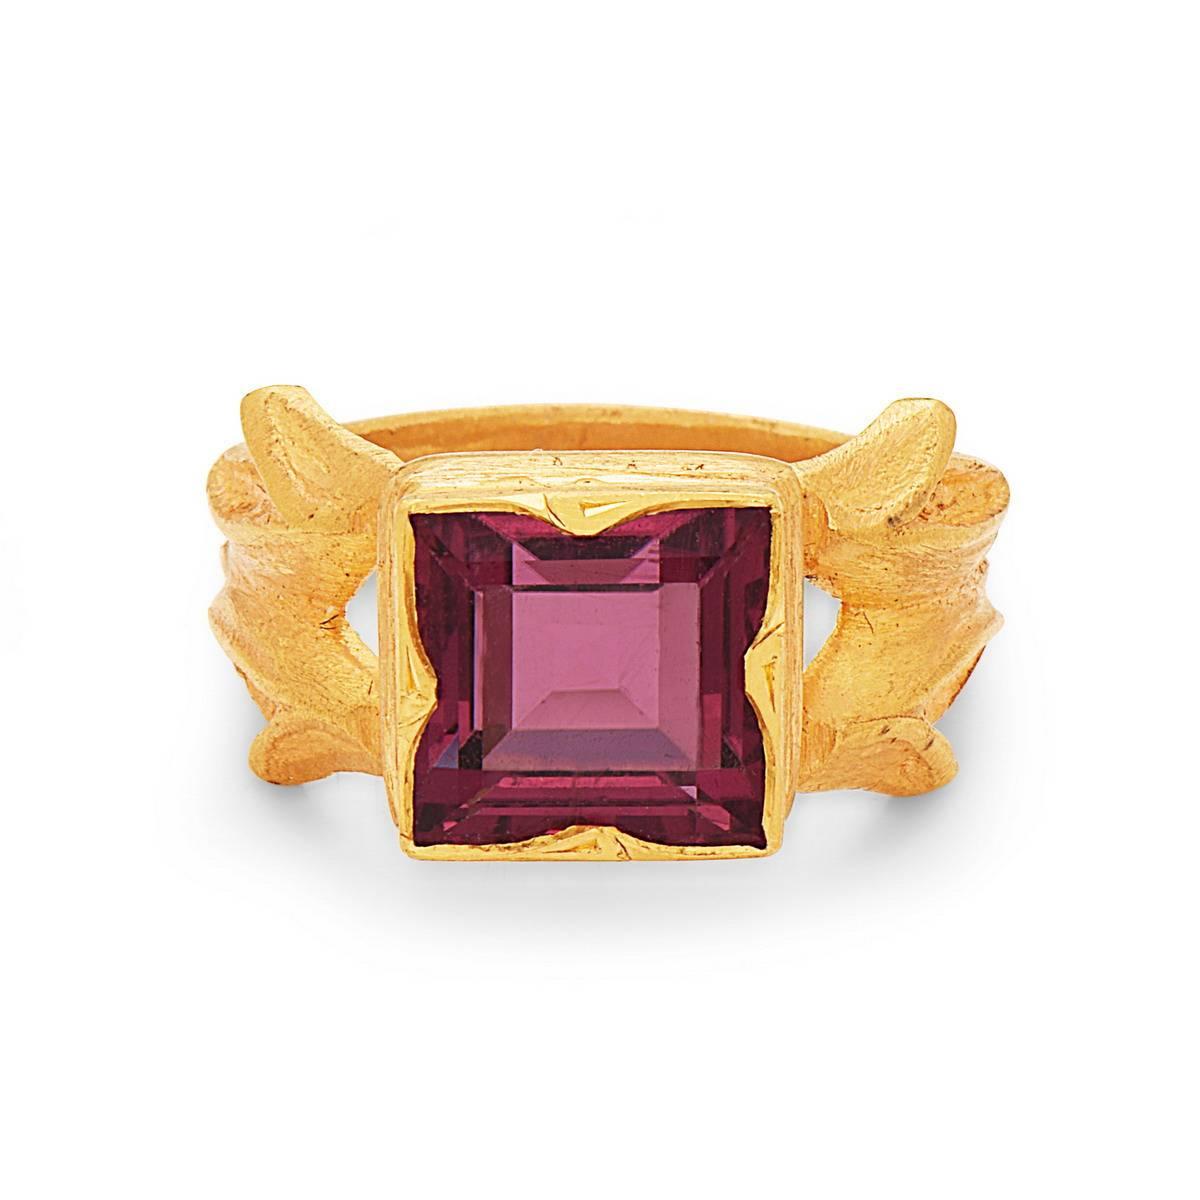 Super stunning princess cut Pink Tourmaline Ring in 22K yellow Gold with hand carved shank. 

Ring Size: 6 ( can be sized )

22kt: 8.12gms
Pink Tourmaline: 4.25cts

